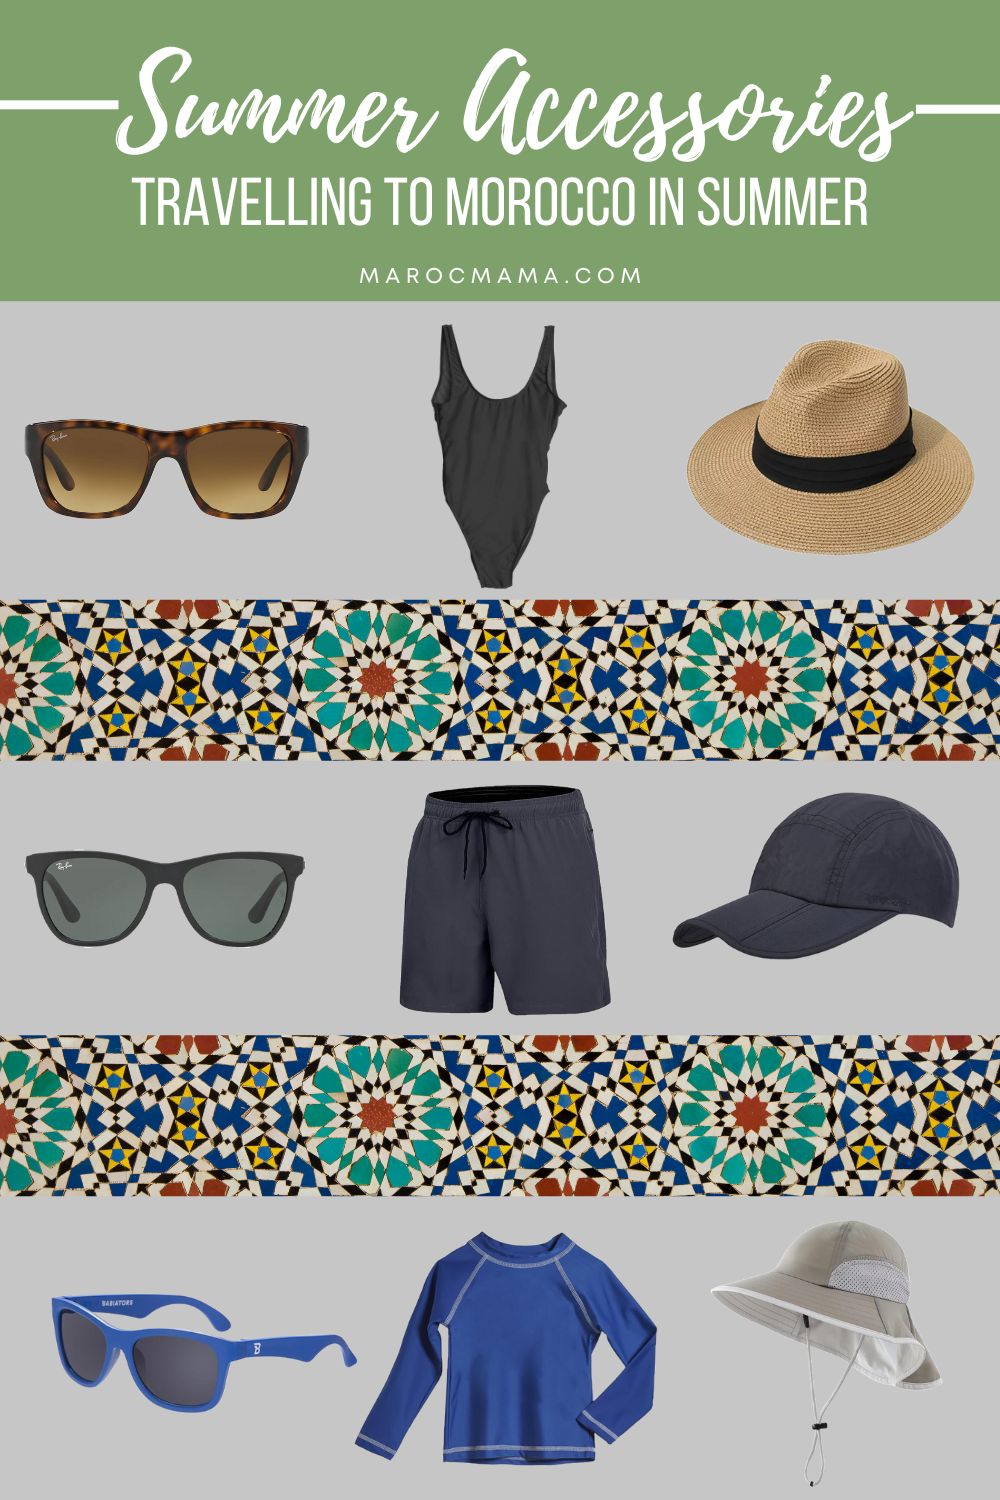 Must-Have Summer Accessories for Morocco